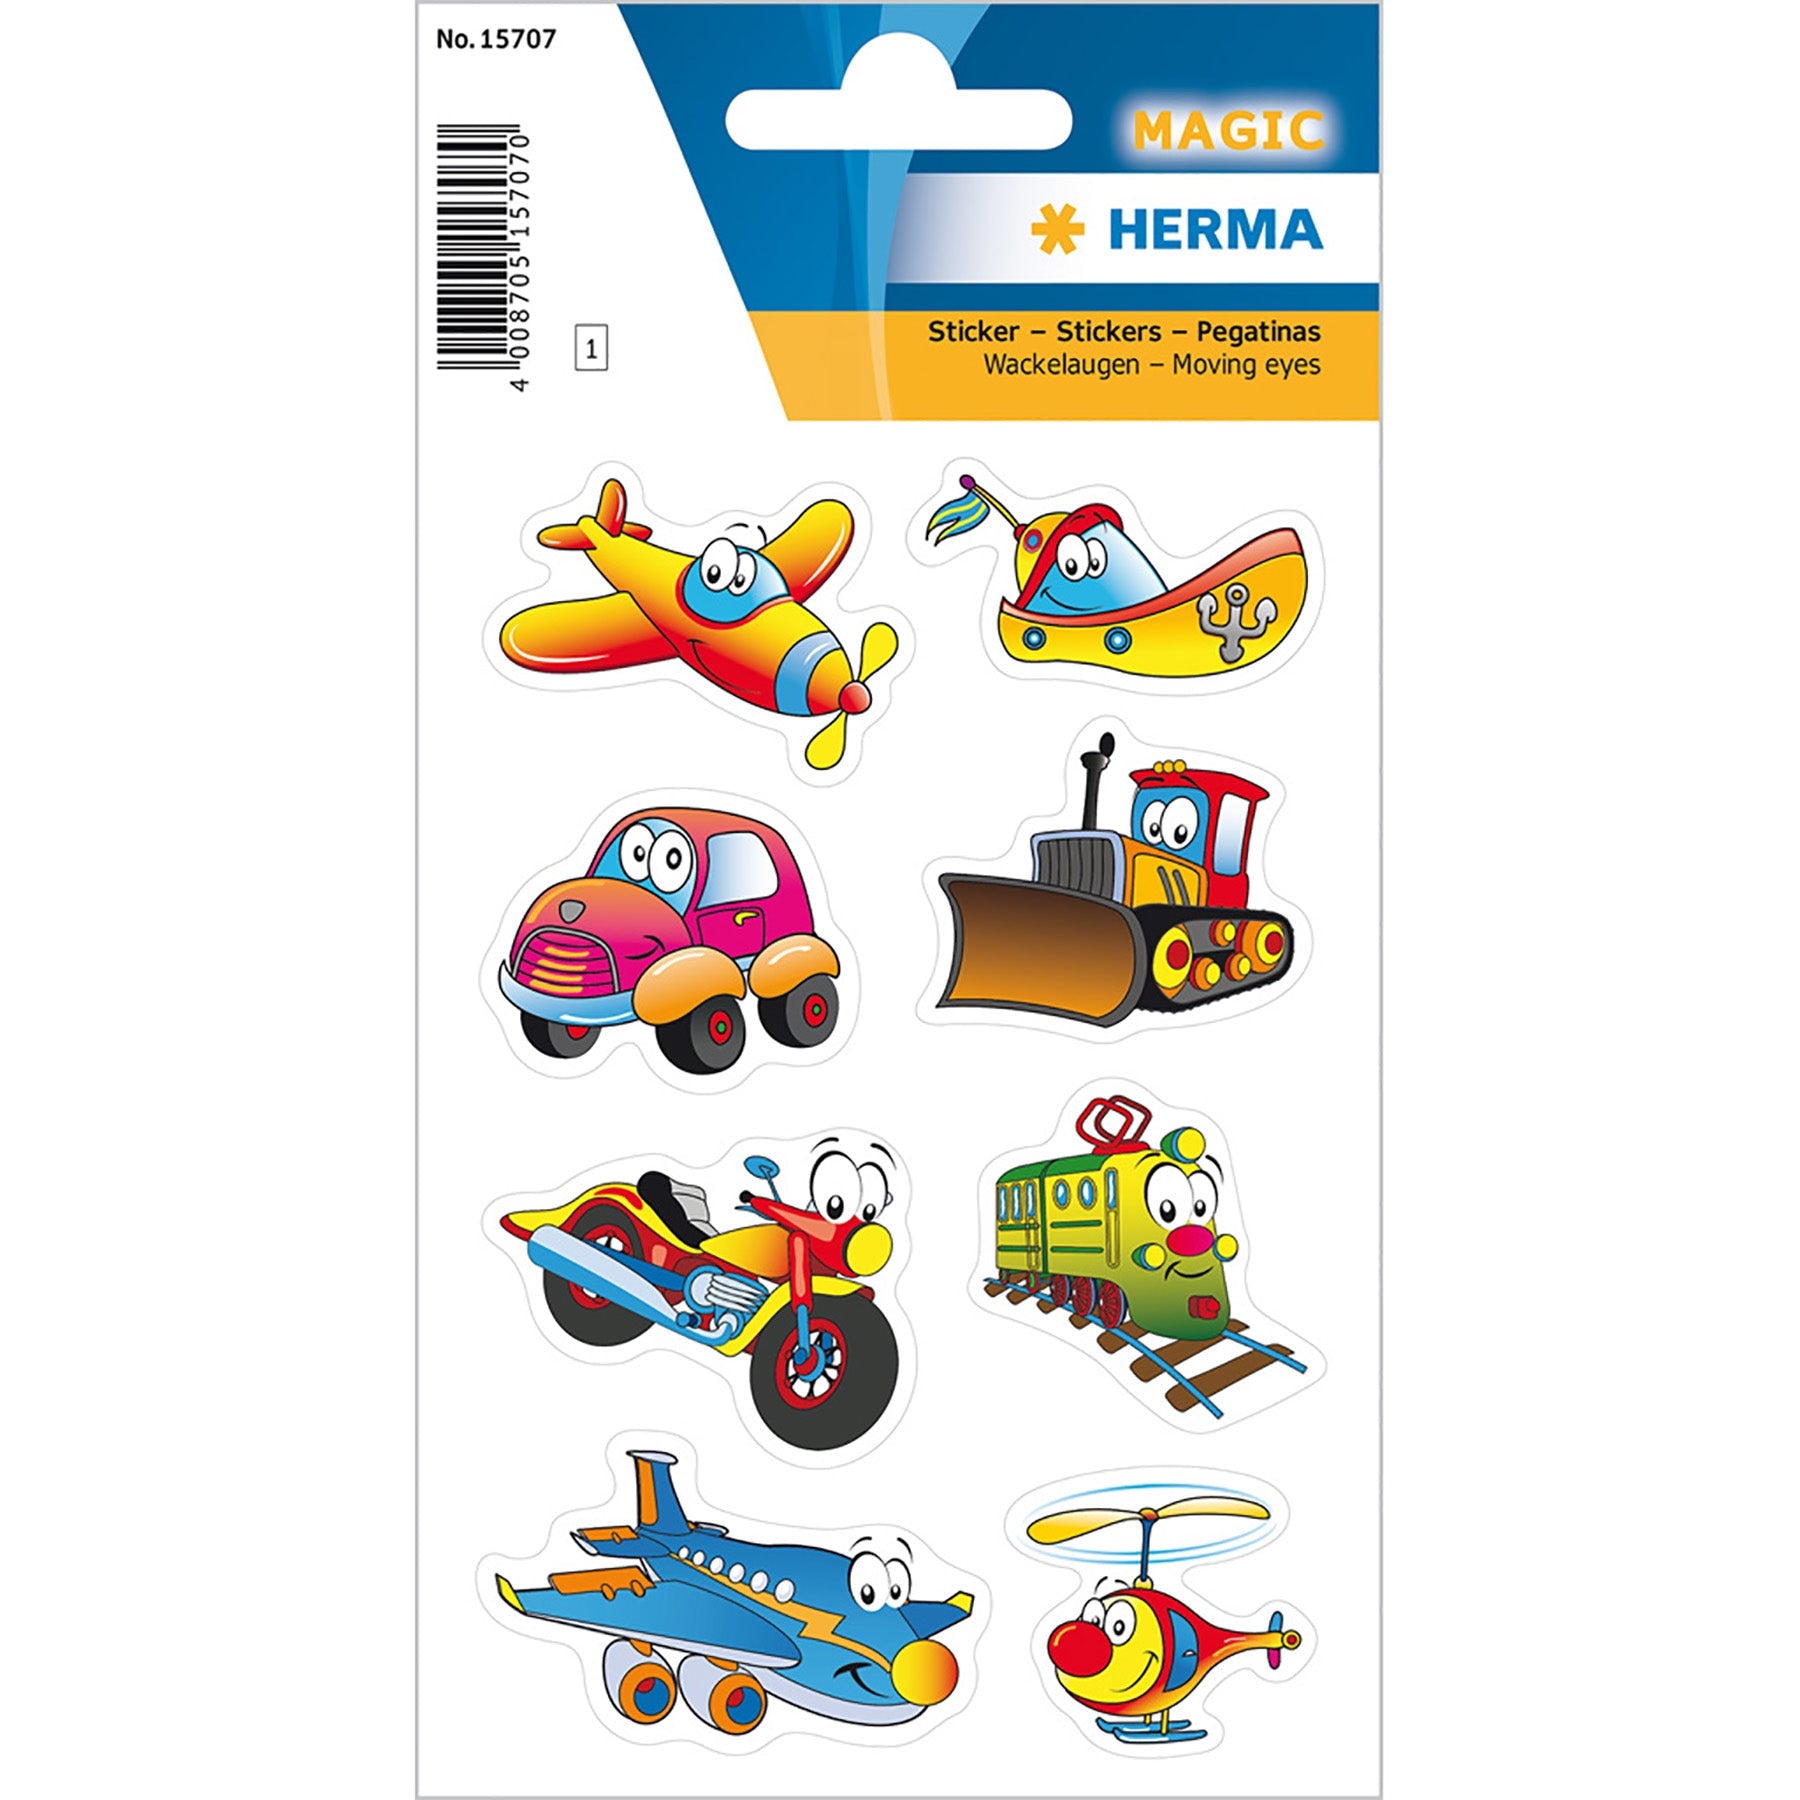 Herma Magic Stickers Vehicules with Nodding Eyes 4.75x3.1in Sheet